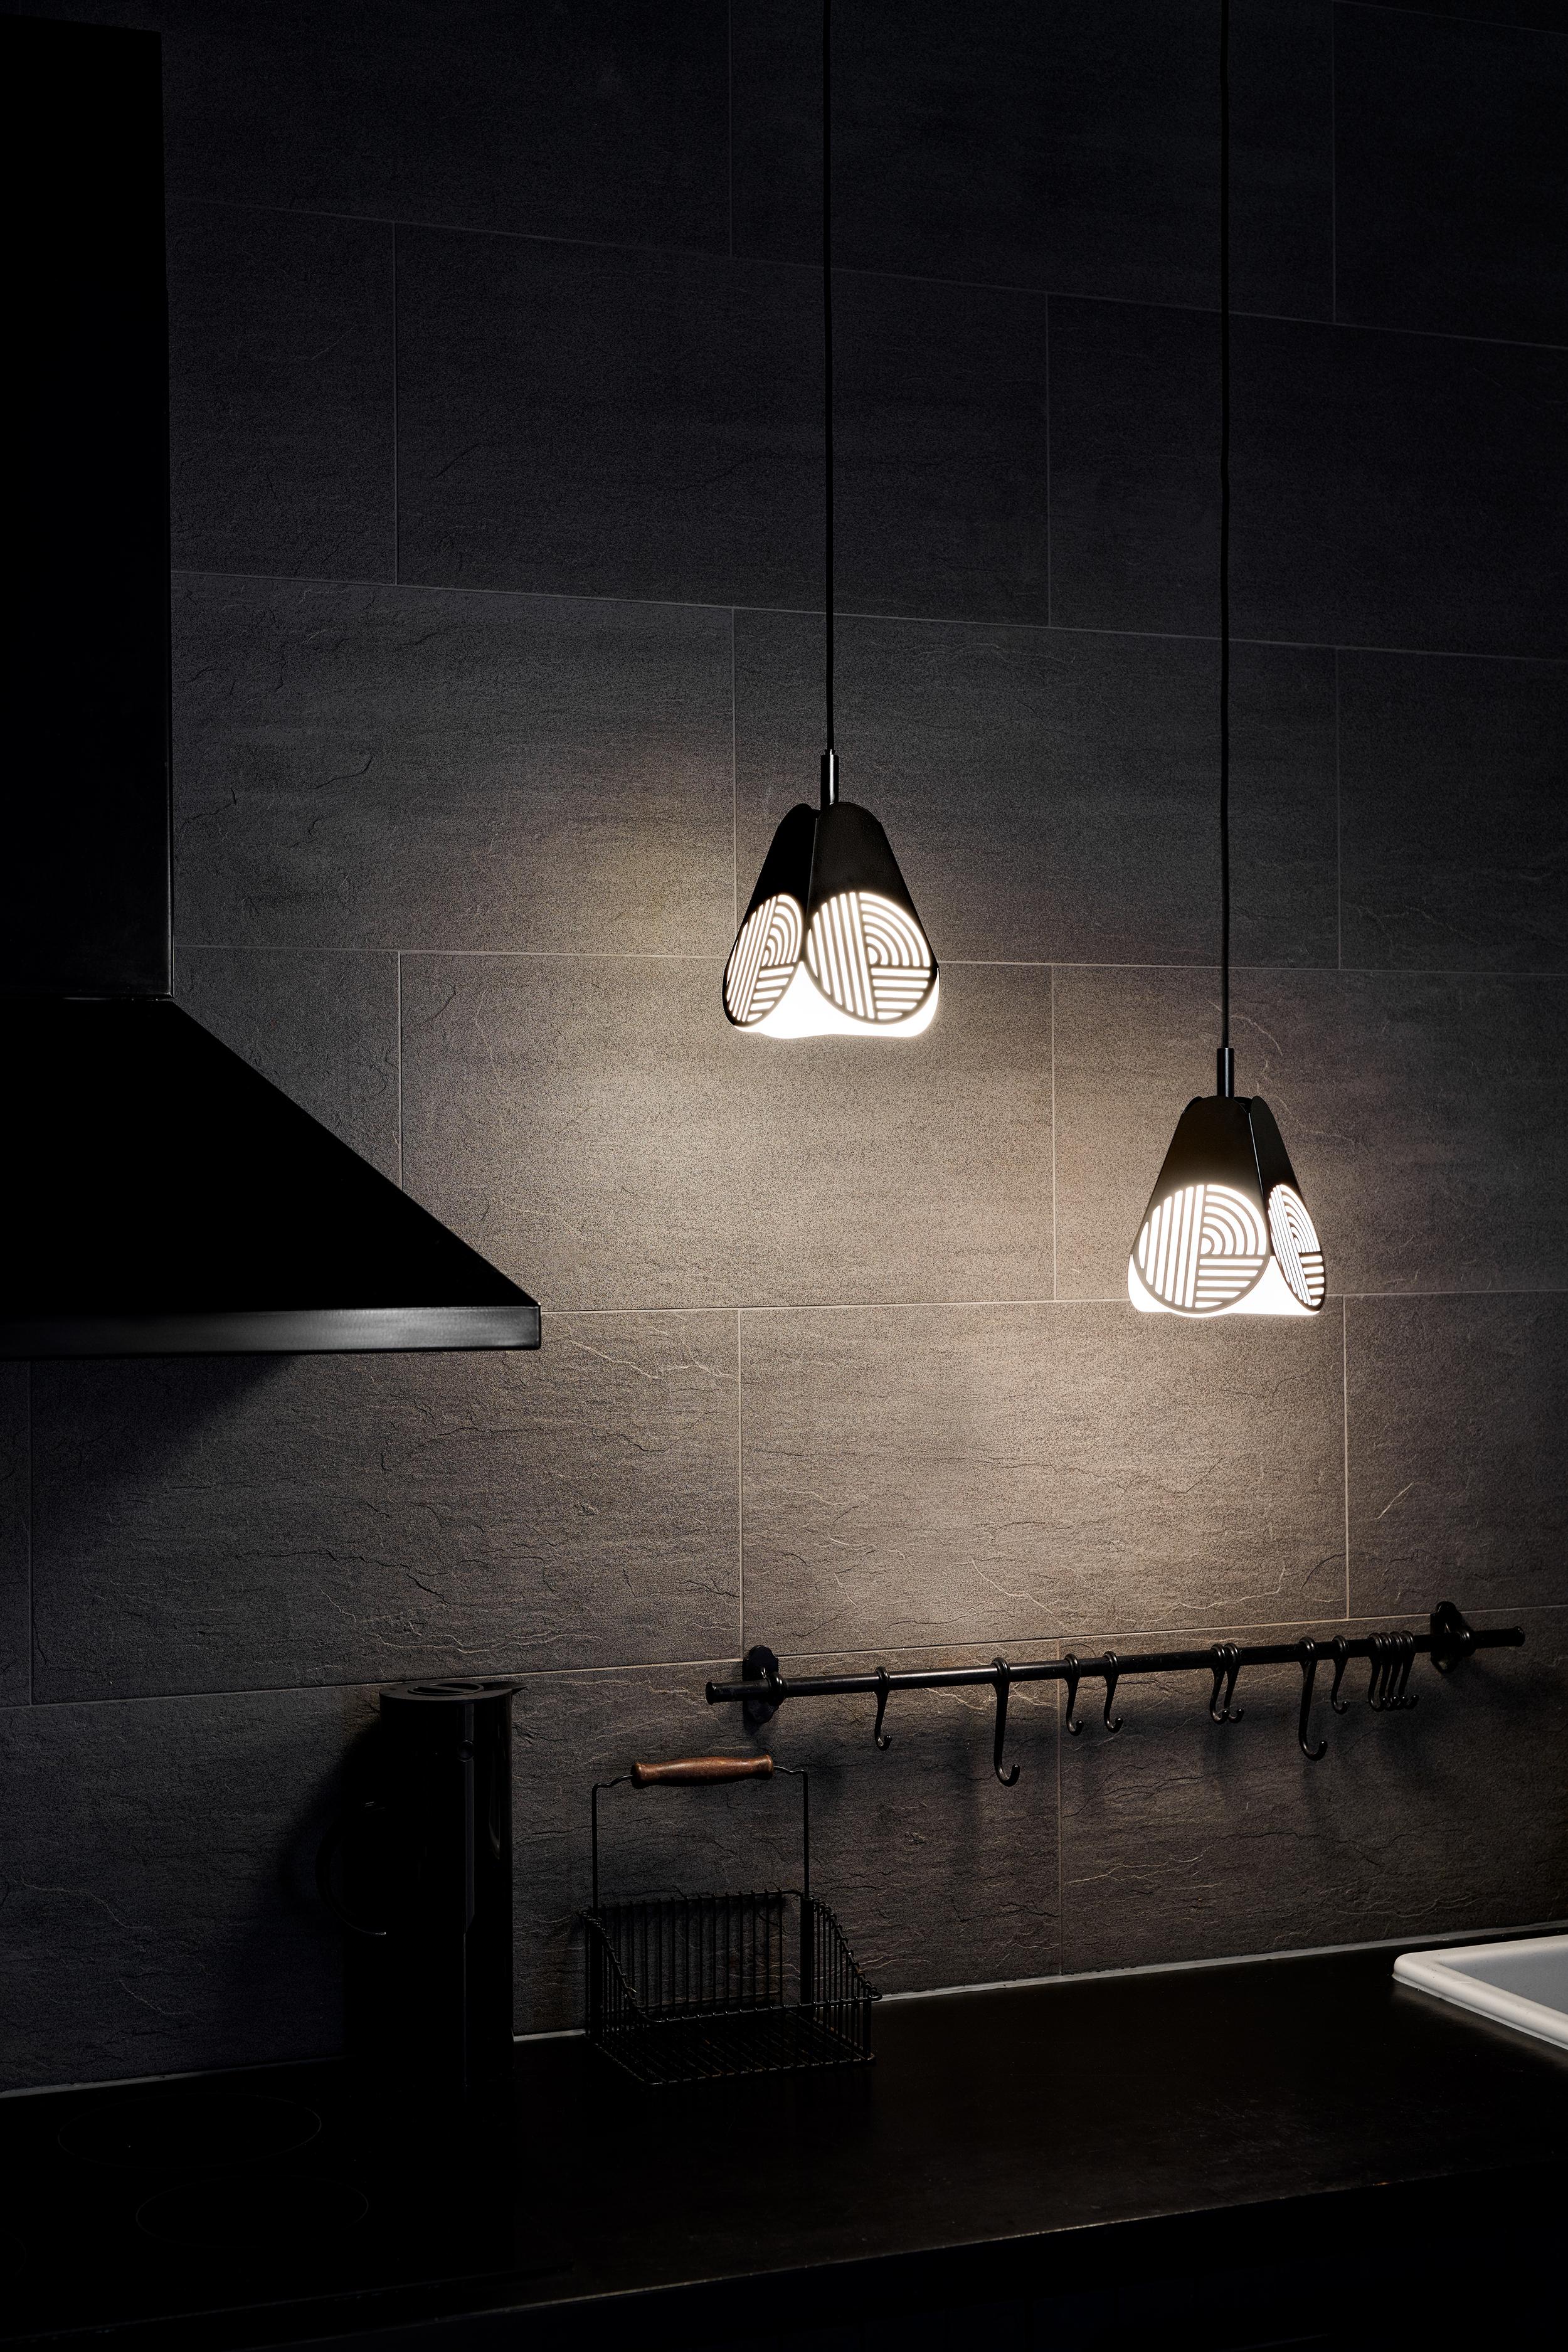 Notic pendant lamp by Bower Studio
Dimensions: 18 x 15.5 cm (Ø) (cord length: 300 cm)

Notic is an homage to classical architectural elements.
The graphical metal shade embraces the complex geometry of the glass and spreads the light in a